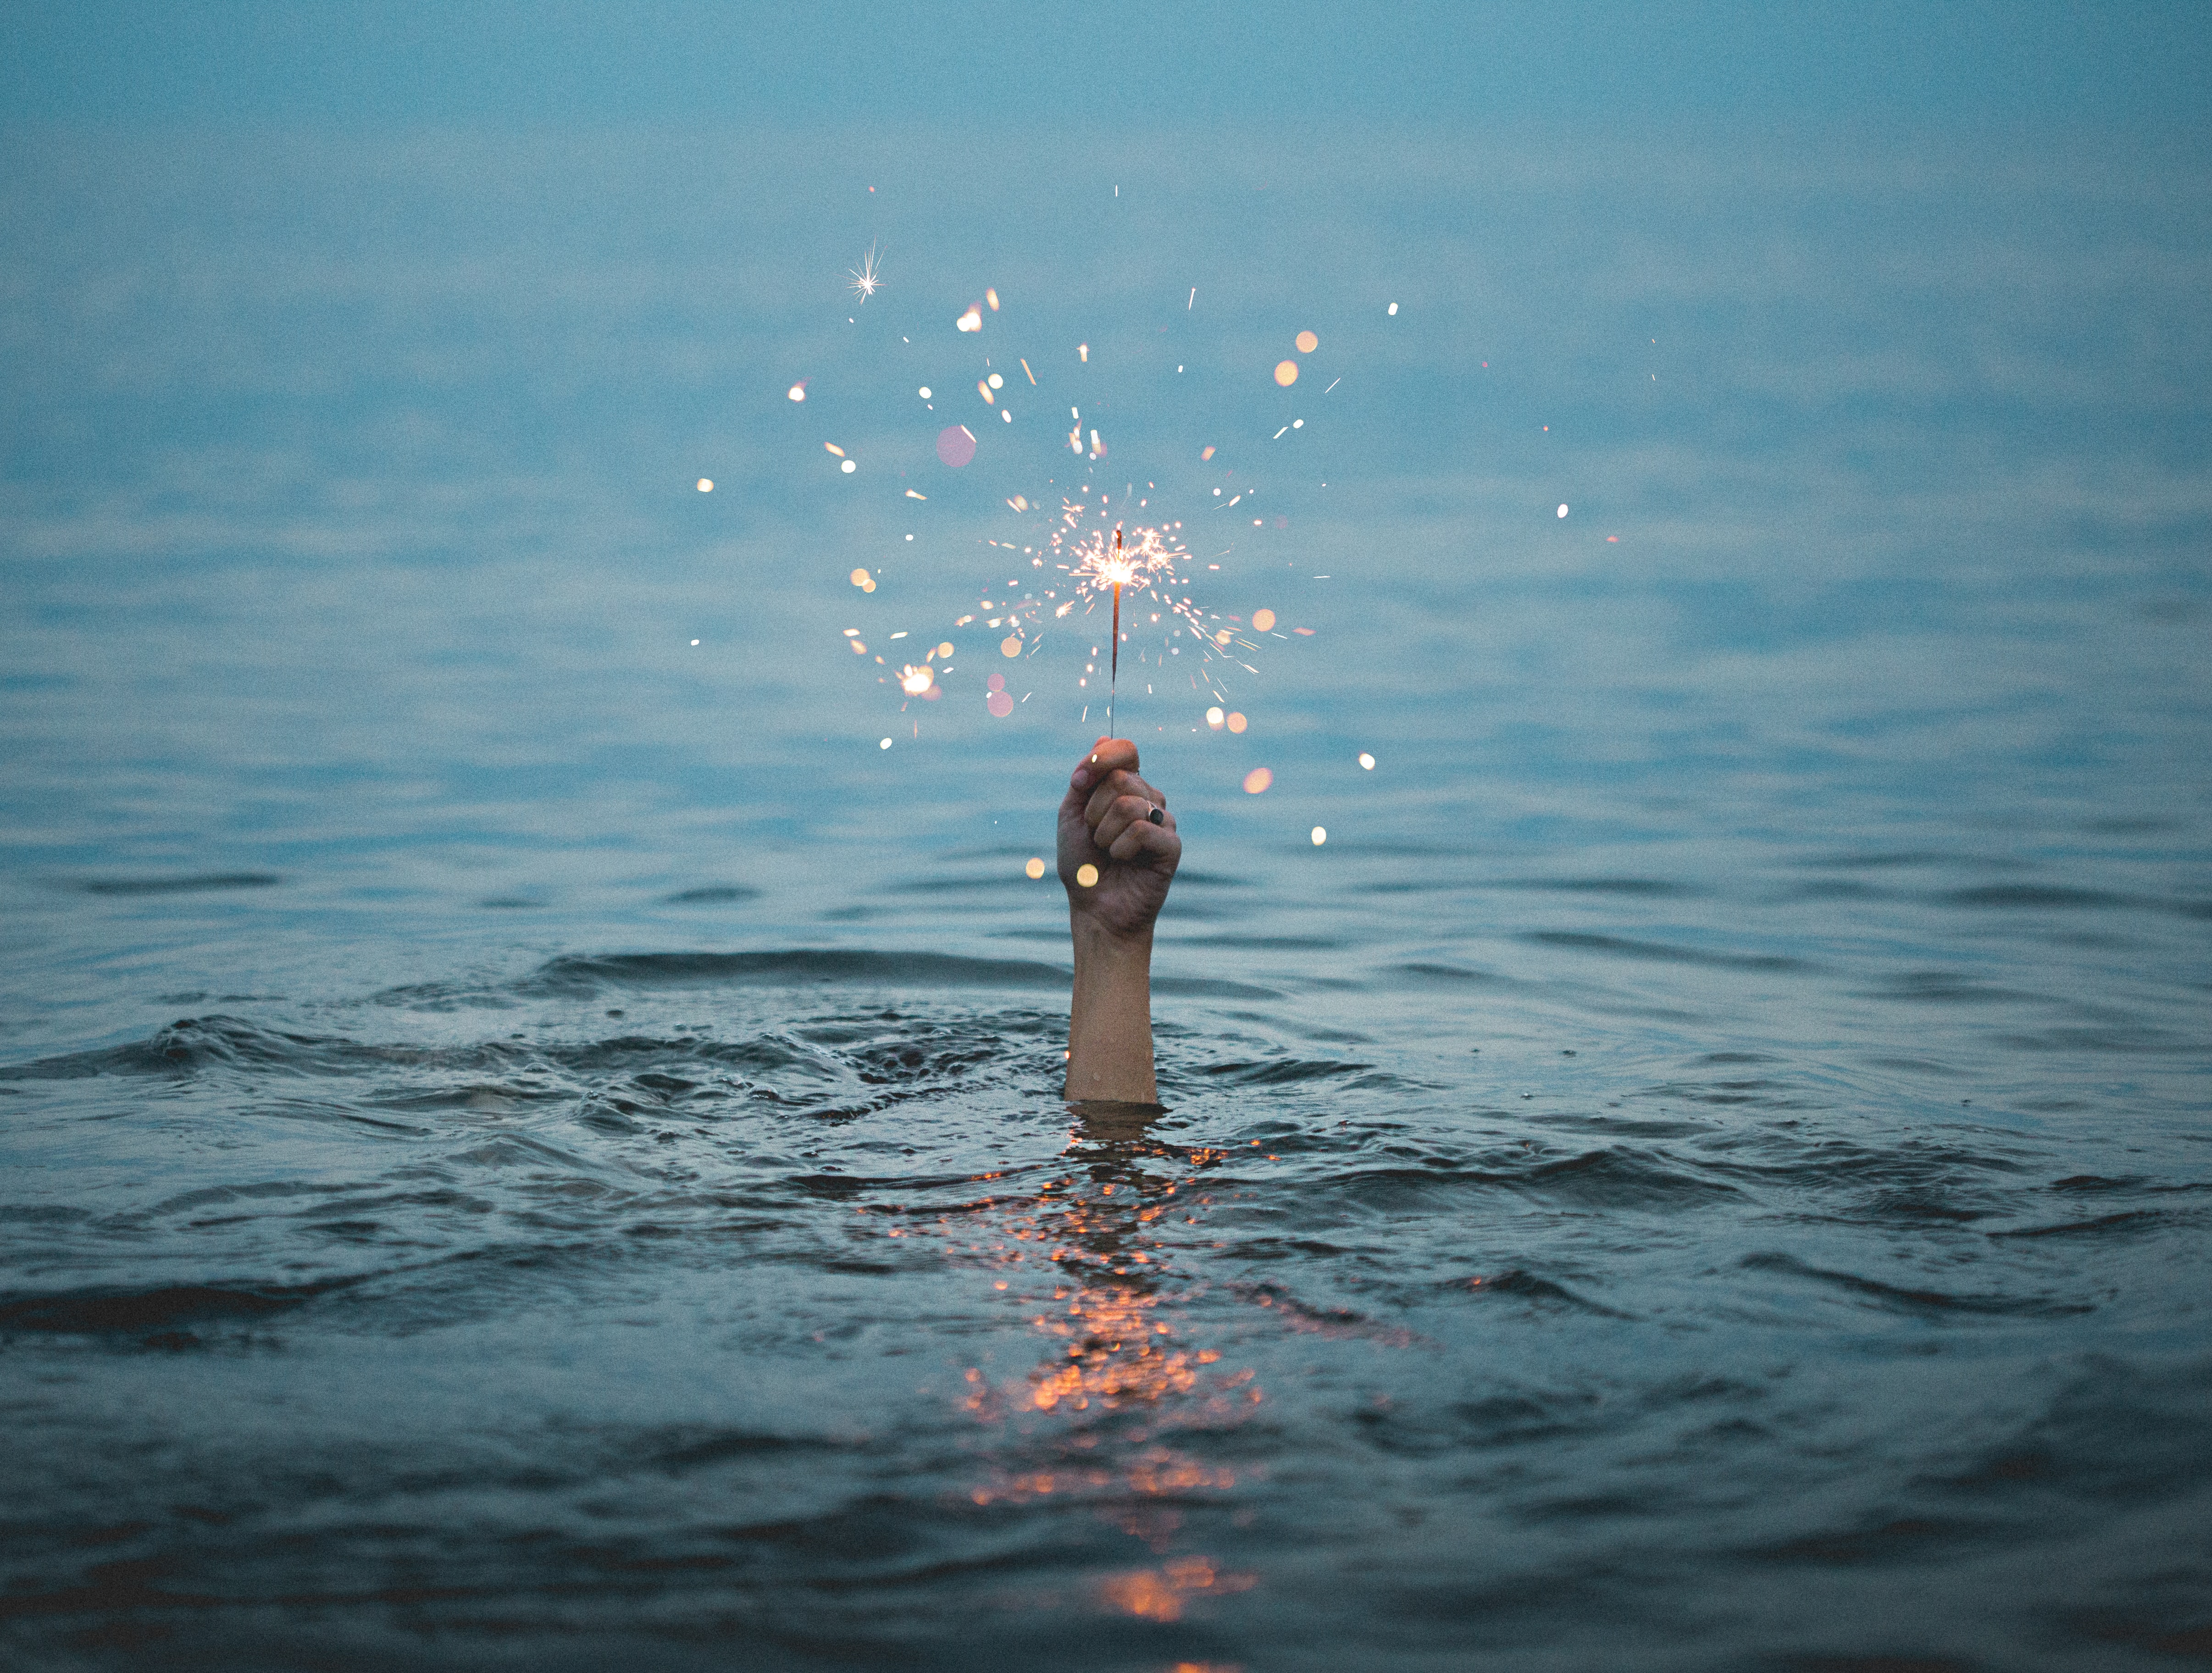 Spark above water